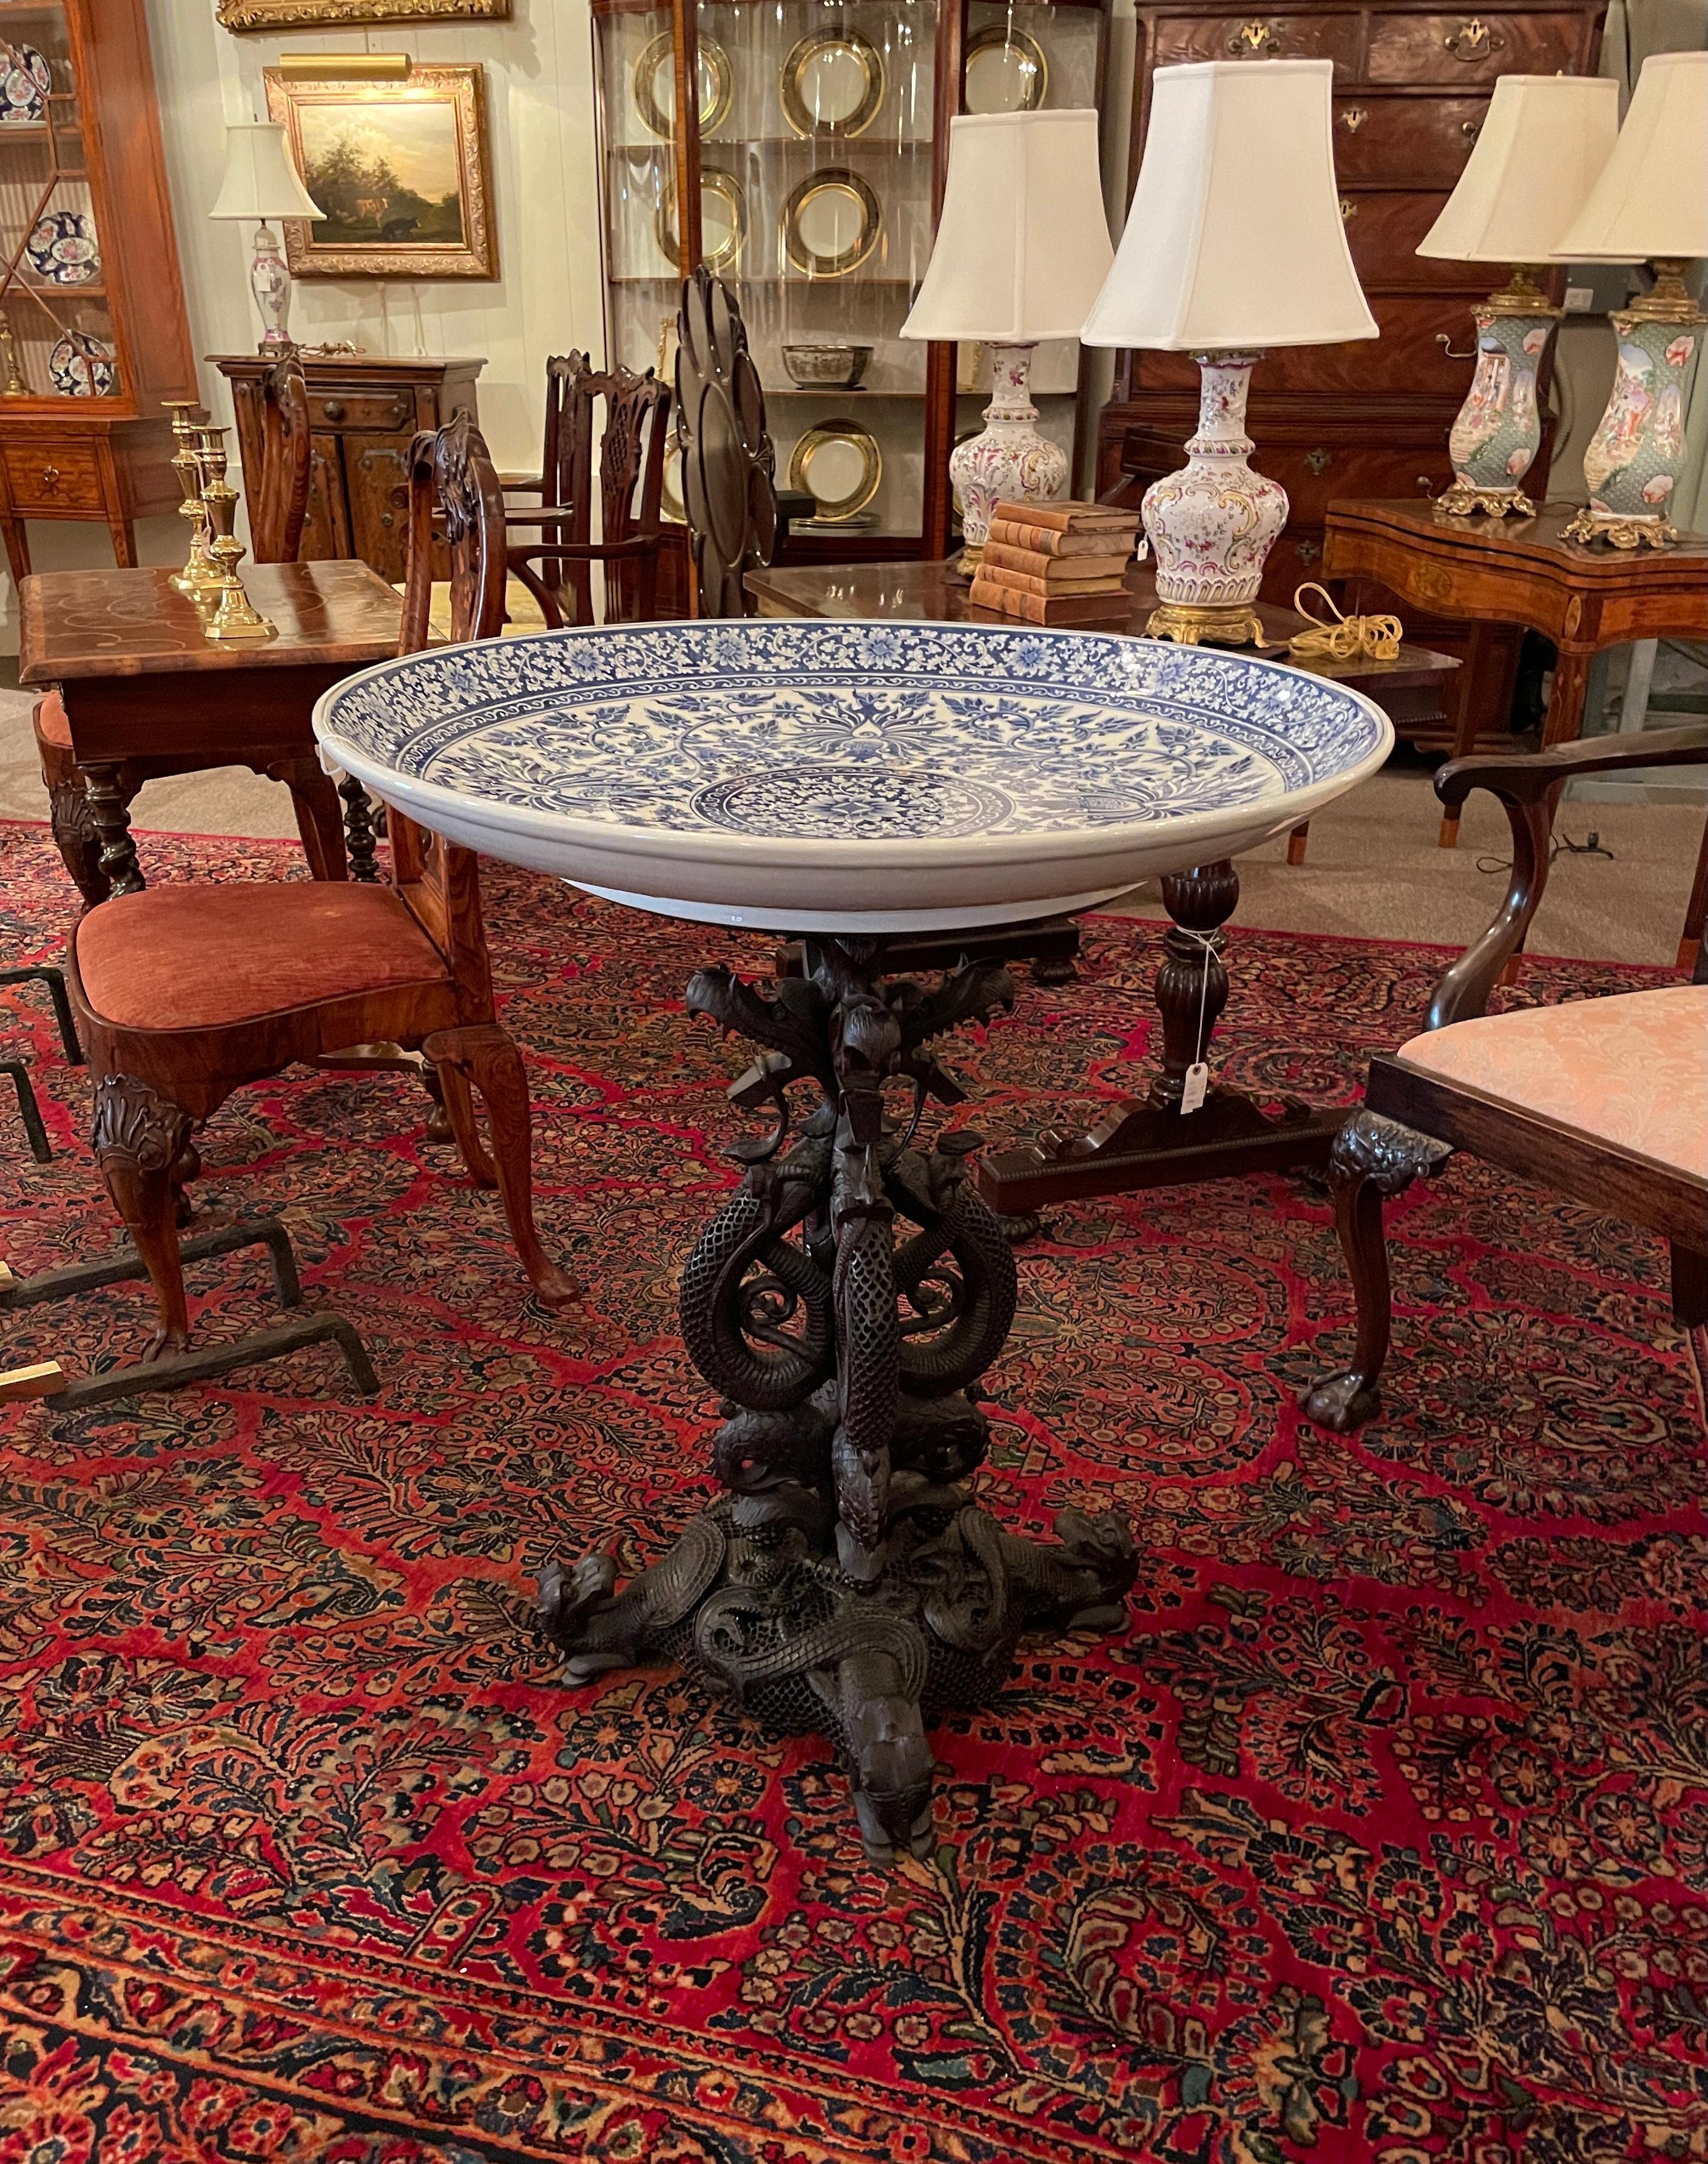 Antique Asian Blue & White Porcelain and Carved Hardwood Table, circa 1900s For Sale 7